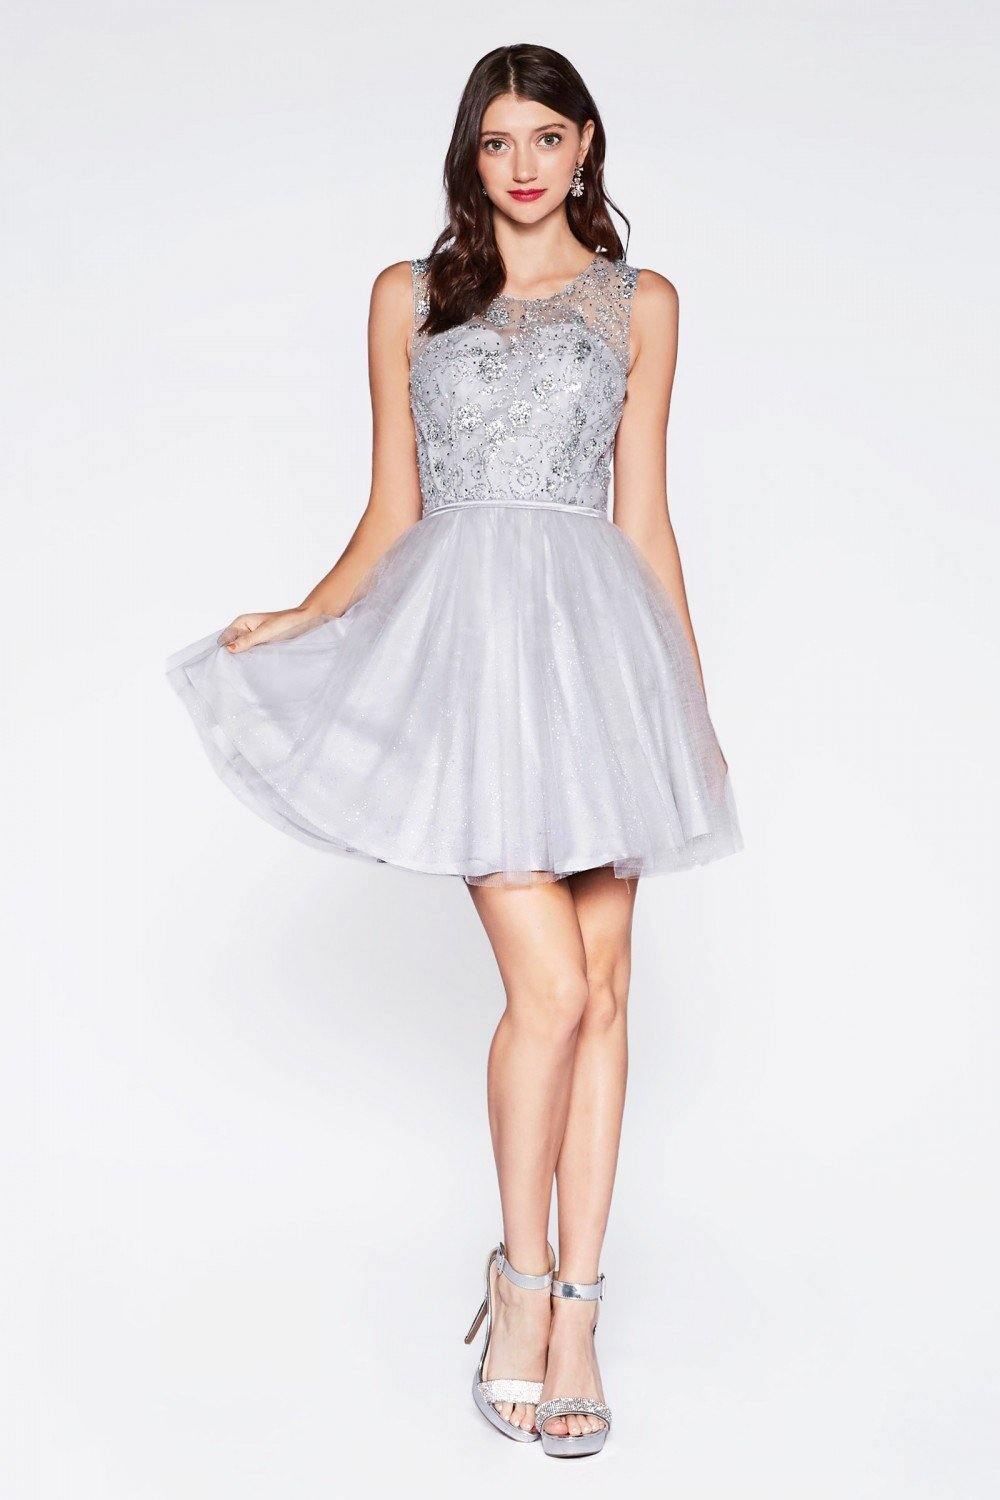 Sexy Homecoming Short Dress - The Dress Outlet Cinderella Divine